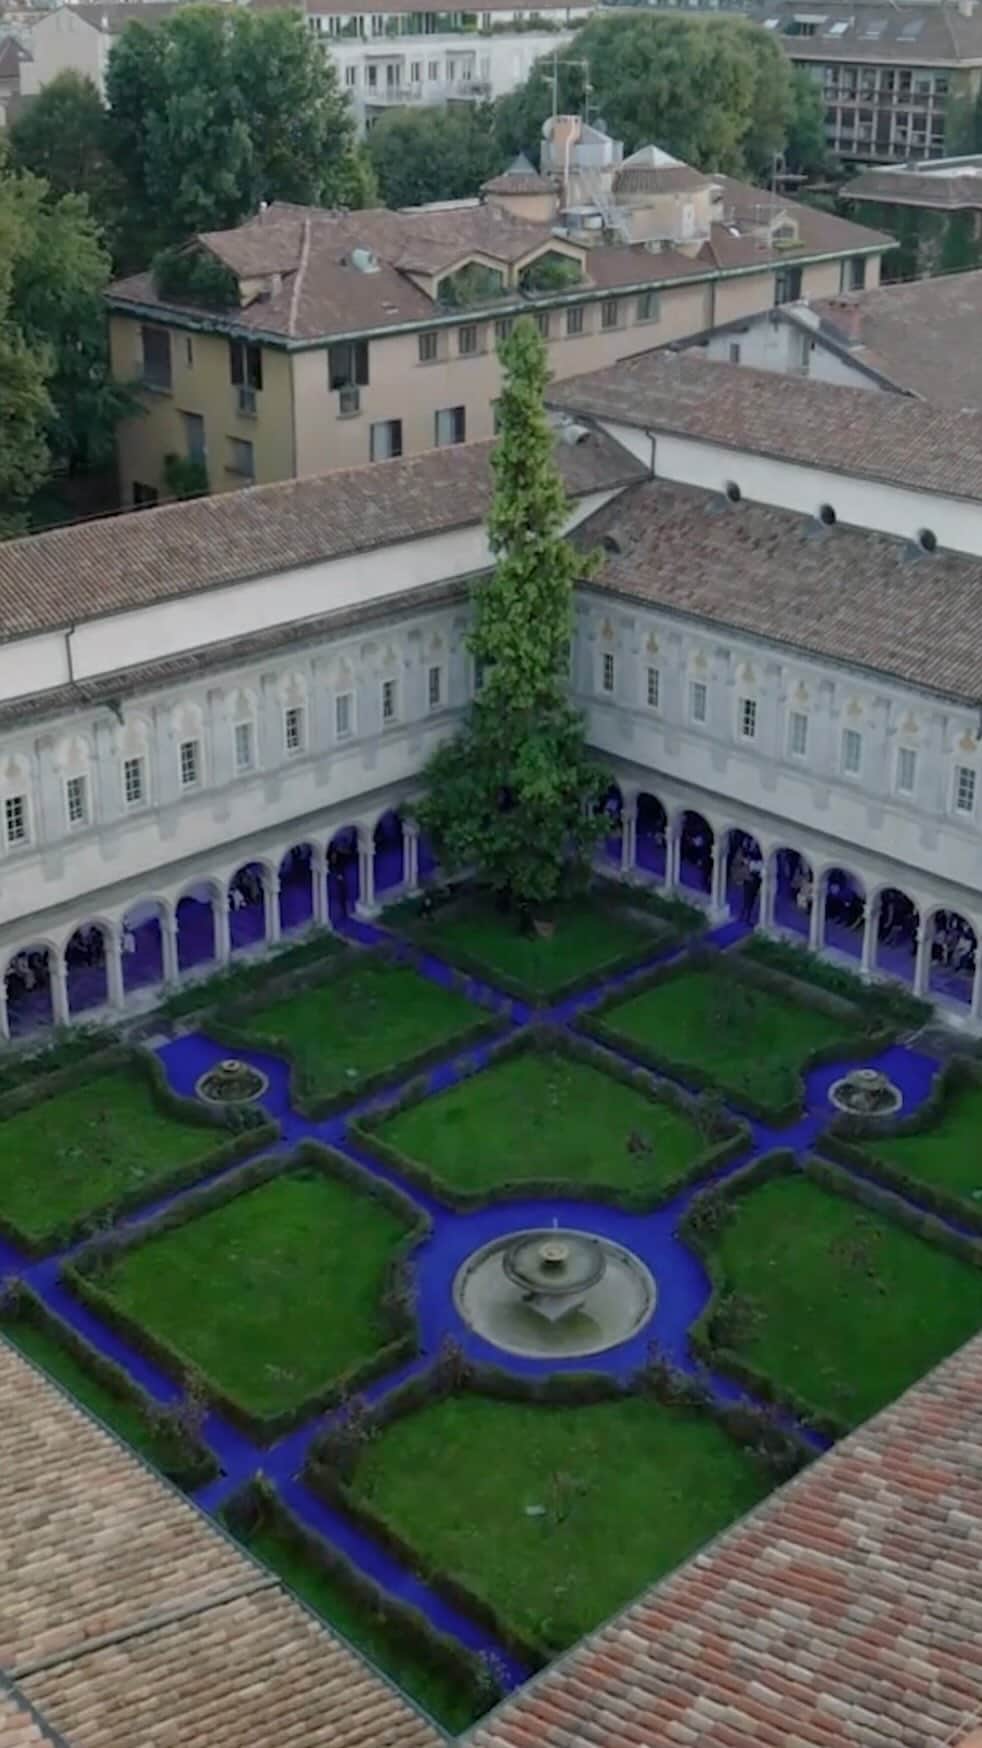 バリーのインスタグラム：「SPRING/SUMMER 2024 FASHION SHOW Milan, Italy.   Paraded through the gardens of the Chiostro di San Simpliciano, the Spring/Summer 2024 collection is a synthesis of the contrasts inherent to Bally – a bastion of craftsmanship infused with pragmatic luxury since 1851. It is a reflection on the precise and the organic, on strictness and softness. From the streets of Zurich to its alpine landscapes, the Swiss identity is manifold. There lies a purity within, and a playfulness that leans subversive, scholastic, essential.    Placing classical design principles in new contexts for contemporary living, the collection departs from a place of sober elegance towards the spirit of the alternative Swiss community of Monte Verità. Their libertarian approach – rejecting the weight of an urban existence for a holistic communion with the environment – was a cultural revolution of literature, dance, painting and performance. Today, Bellotti evokes this bohemian élan through the bespoke sounds of DJ Leo Mas, whose Balearic sounds marked Ibiza’s Summer of Love in 1987 with the same carefree abandon.    In a confluence of masculine and feminine wardrobes, the collection embraces a concept of duality, inspired by Bellotti’s vision of a brand with layers, a reflection of our human nature.   Design Director: Simone Bellotti  Production: Villa Eugenie  Sound Design: DJ Leo Mas  Stylist: Charlotte Collet  Casting: Ben Grimes Make-up: Lucia Pica  Hair: Anthony Turner   @villaeugenie, @charlottecolletcollet, @ben_grimes_casting, @luciapicaofficial, @anthonyturnerhair   #Bally #BallySS24 #Ballyaric #MFW」